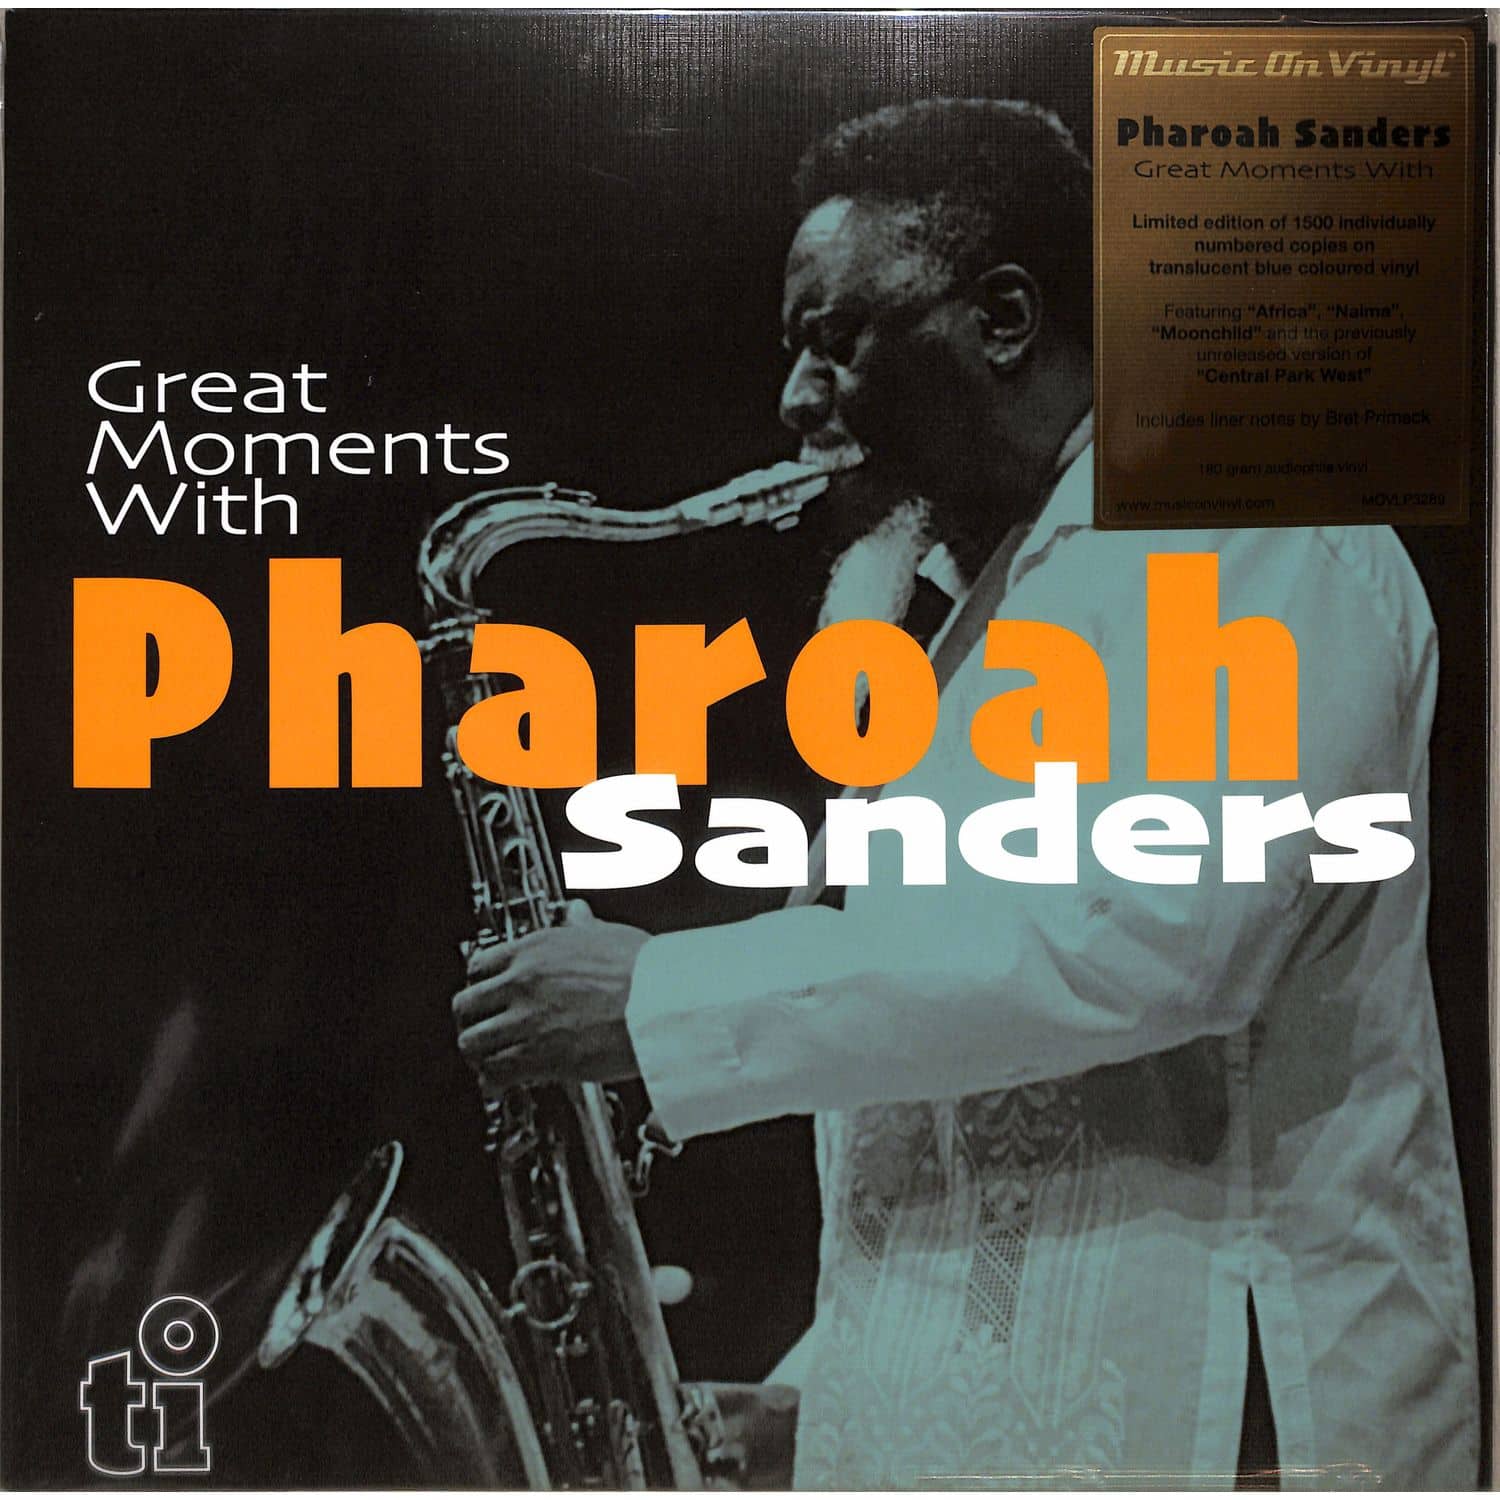 Pharoah Sanders - GREAT MOMENTS WITH 